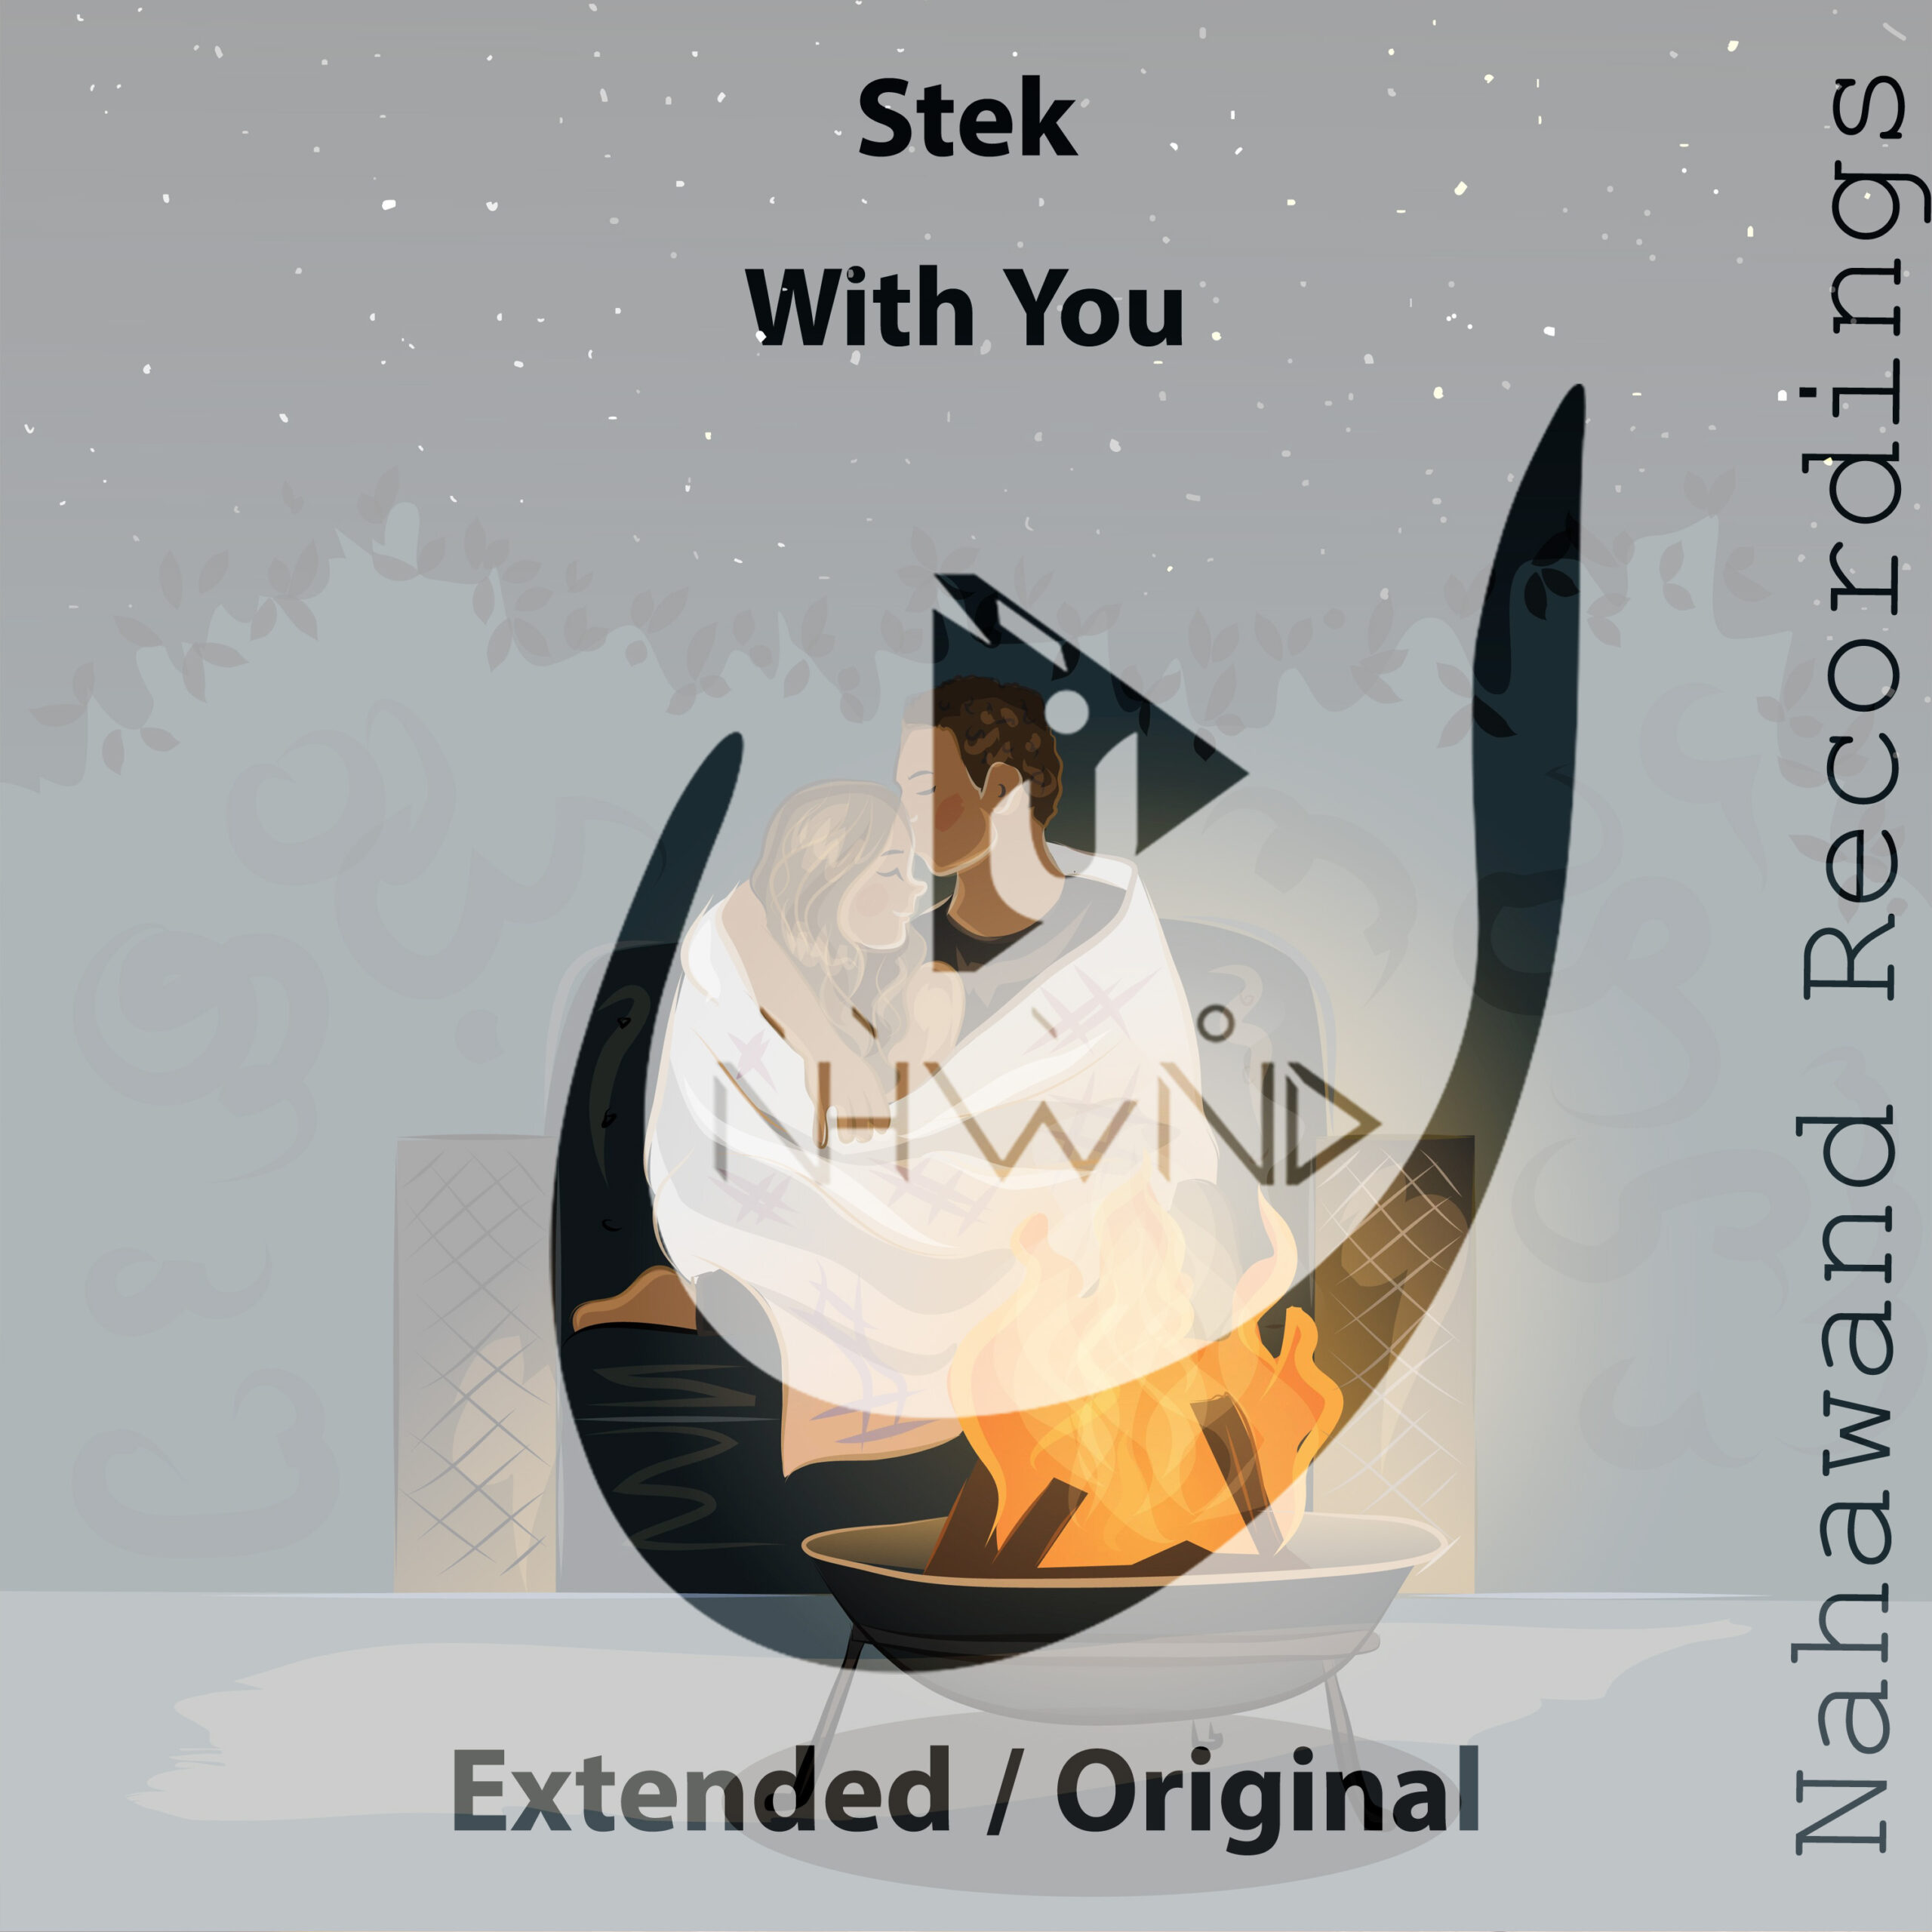 Stek presents With You on Nahawand Recordings